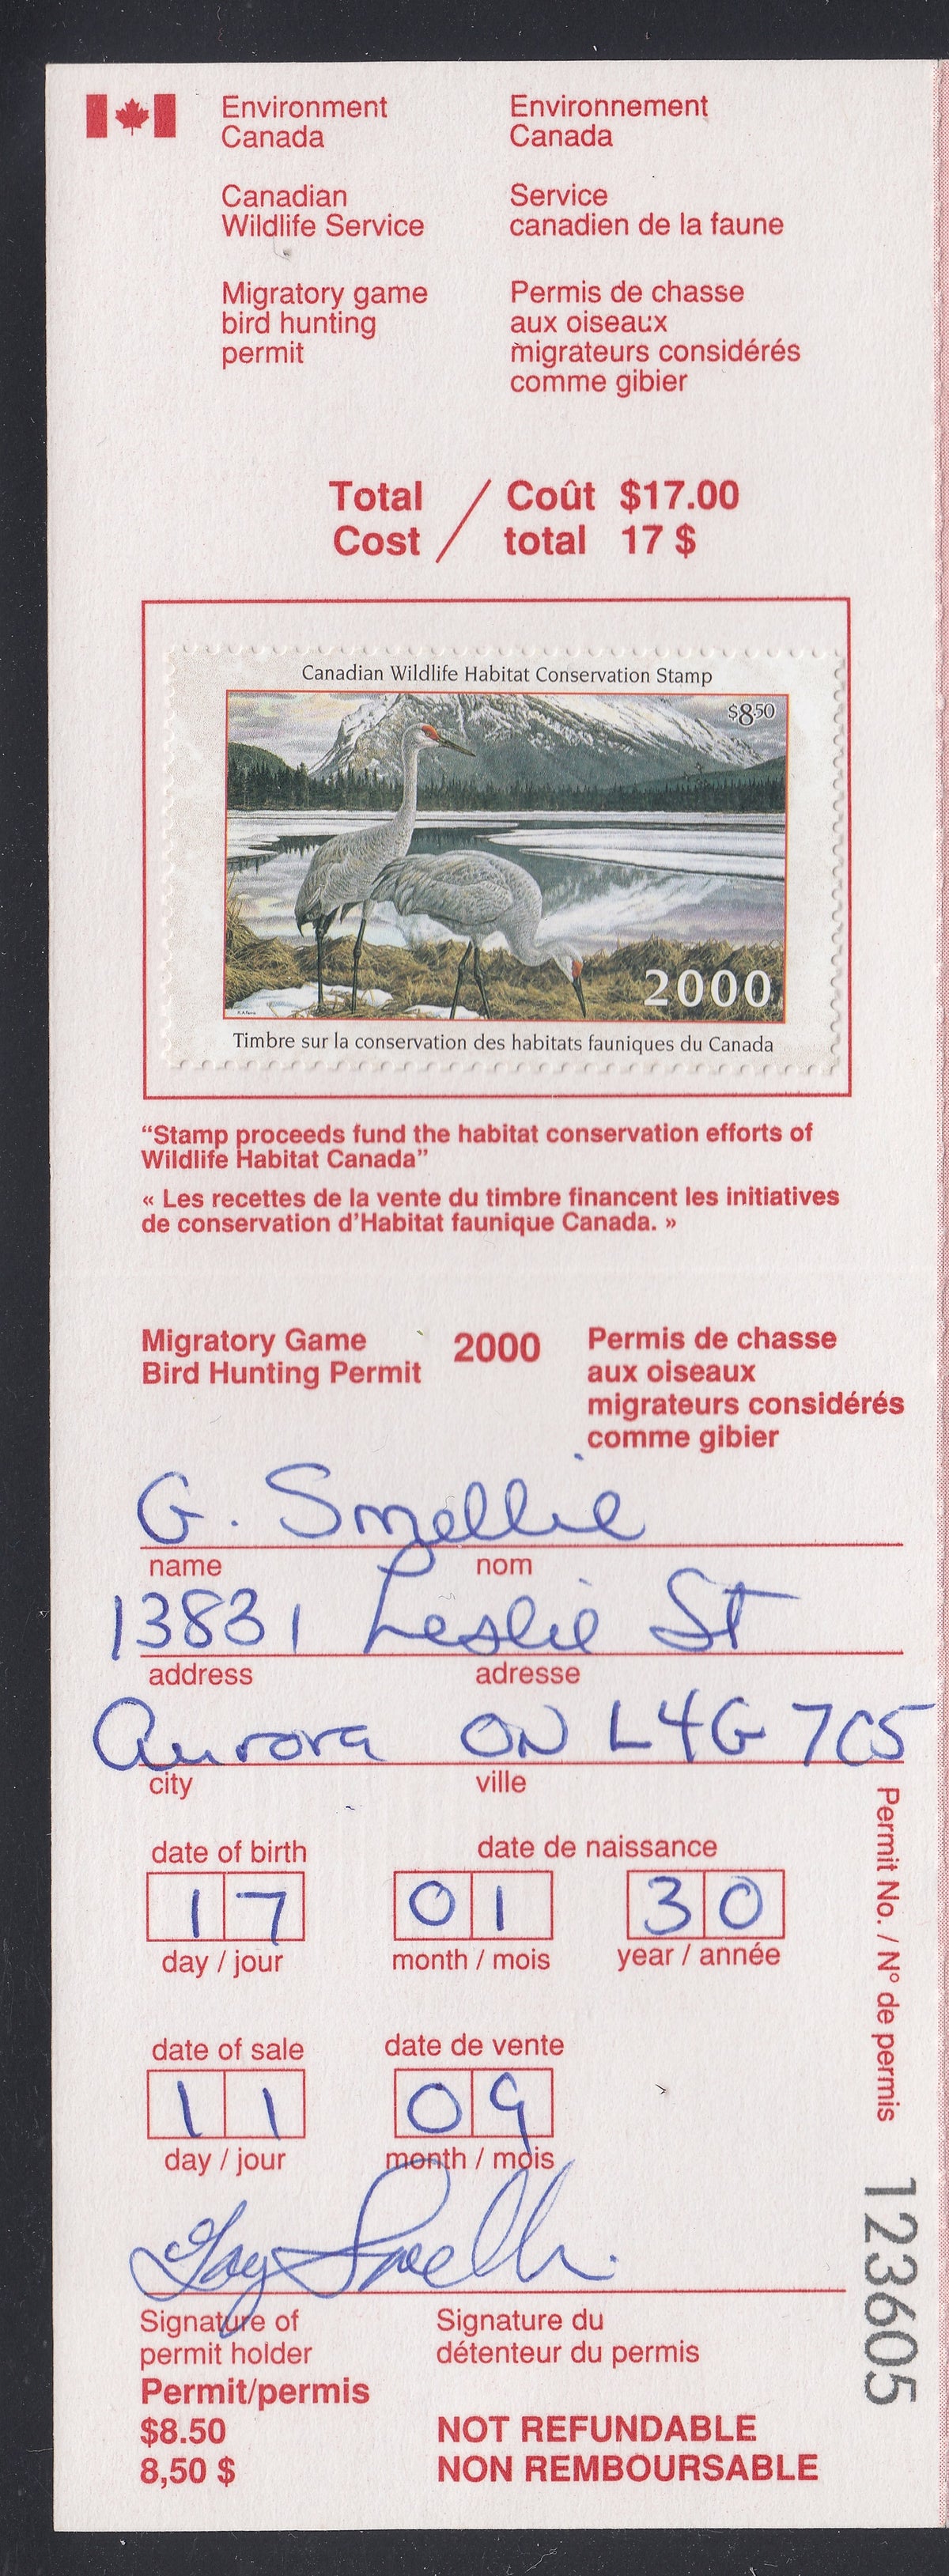 0016FW2105 - FWH16 - Used on License